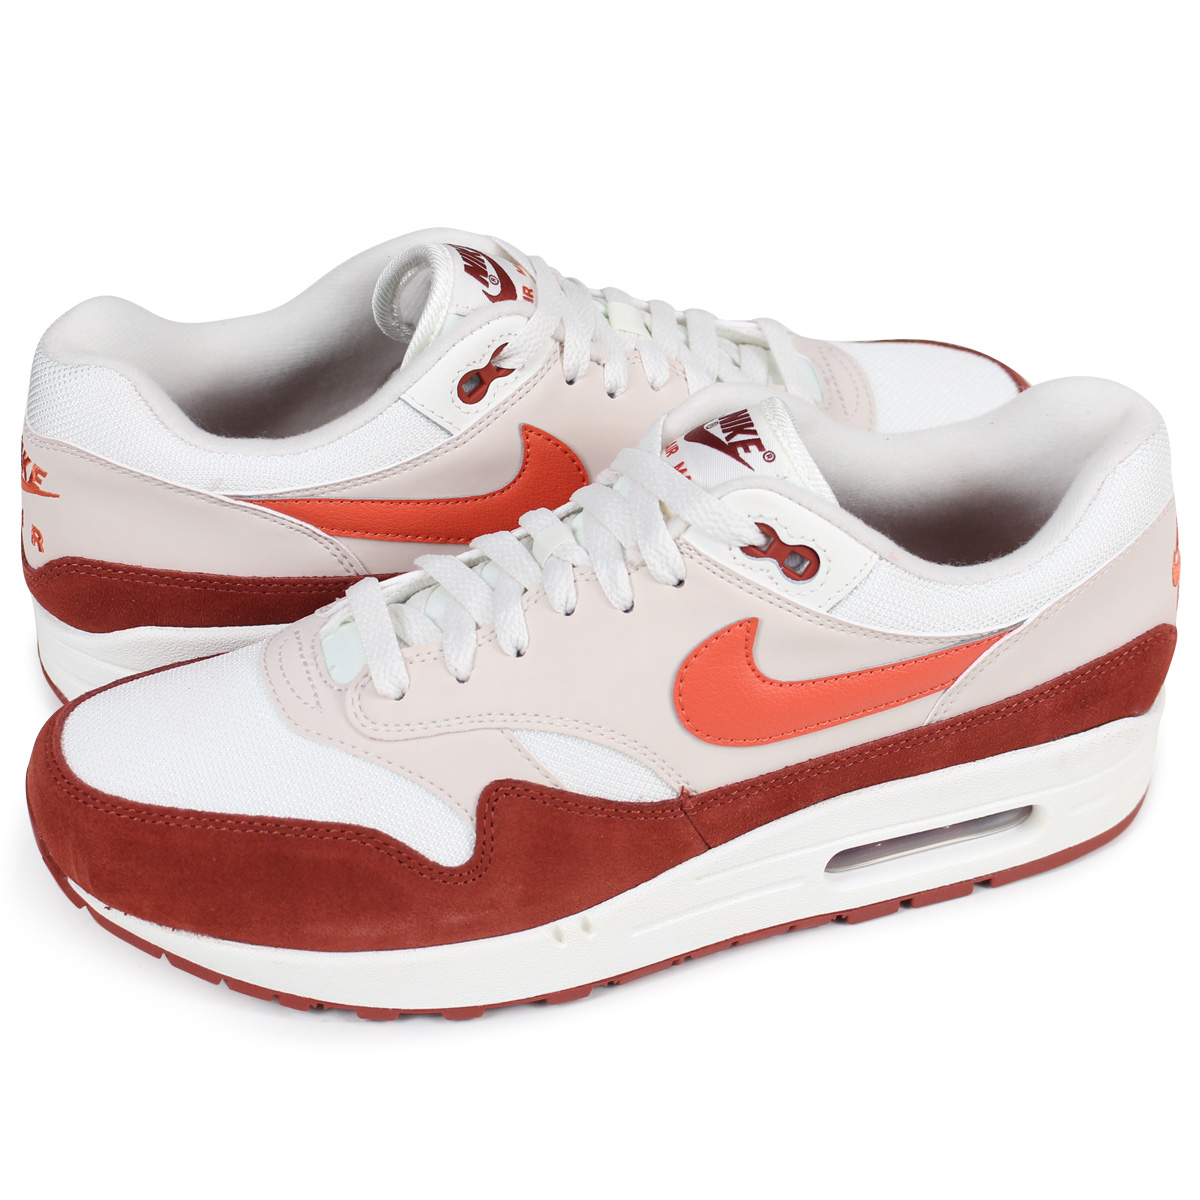 Whats up Sports: NIKE AIR MAX 1 Kie Ney AMAX 1 sneakers men AH8145-104 off-white [load ...1200 x 1200